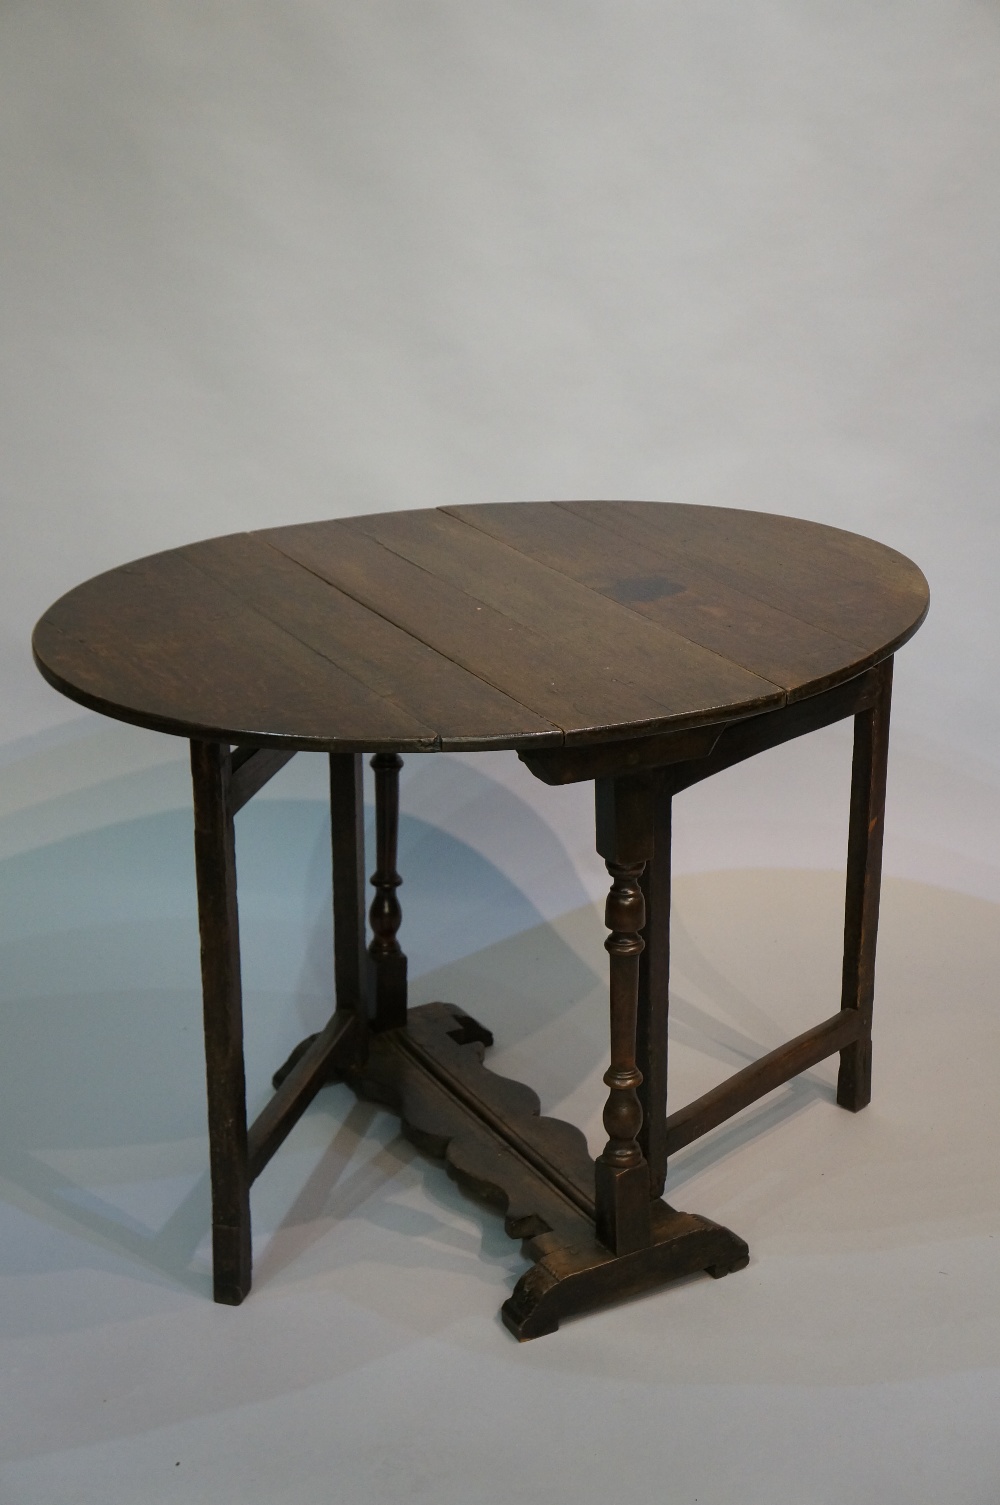 A late 17th Century style drop leaf tabl - Image 2 of 2